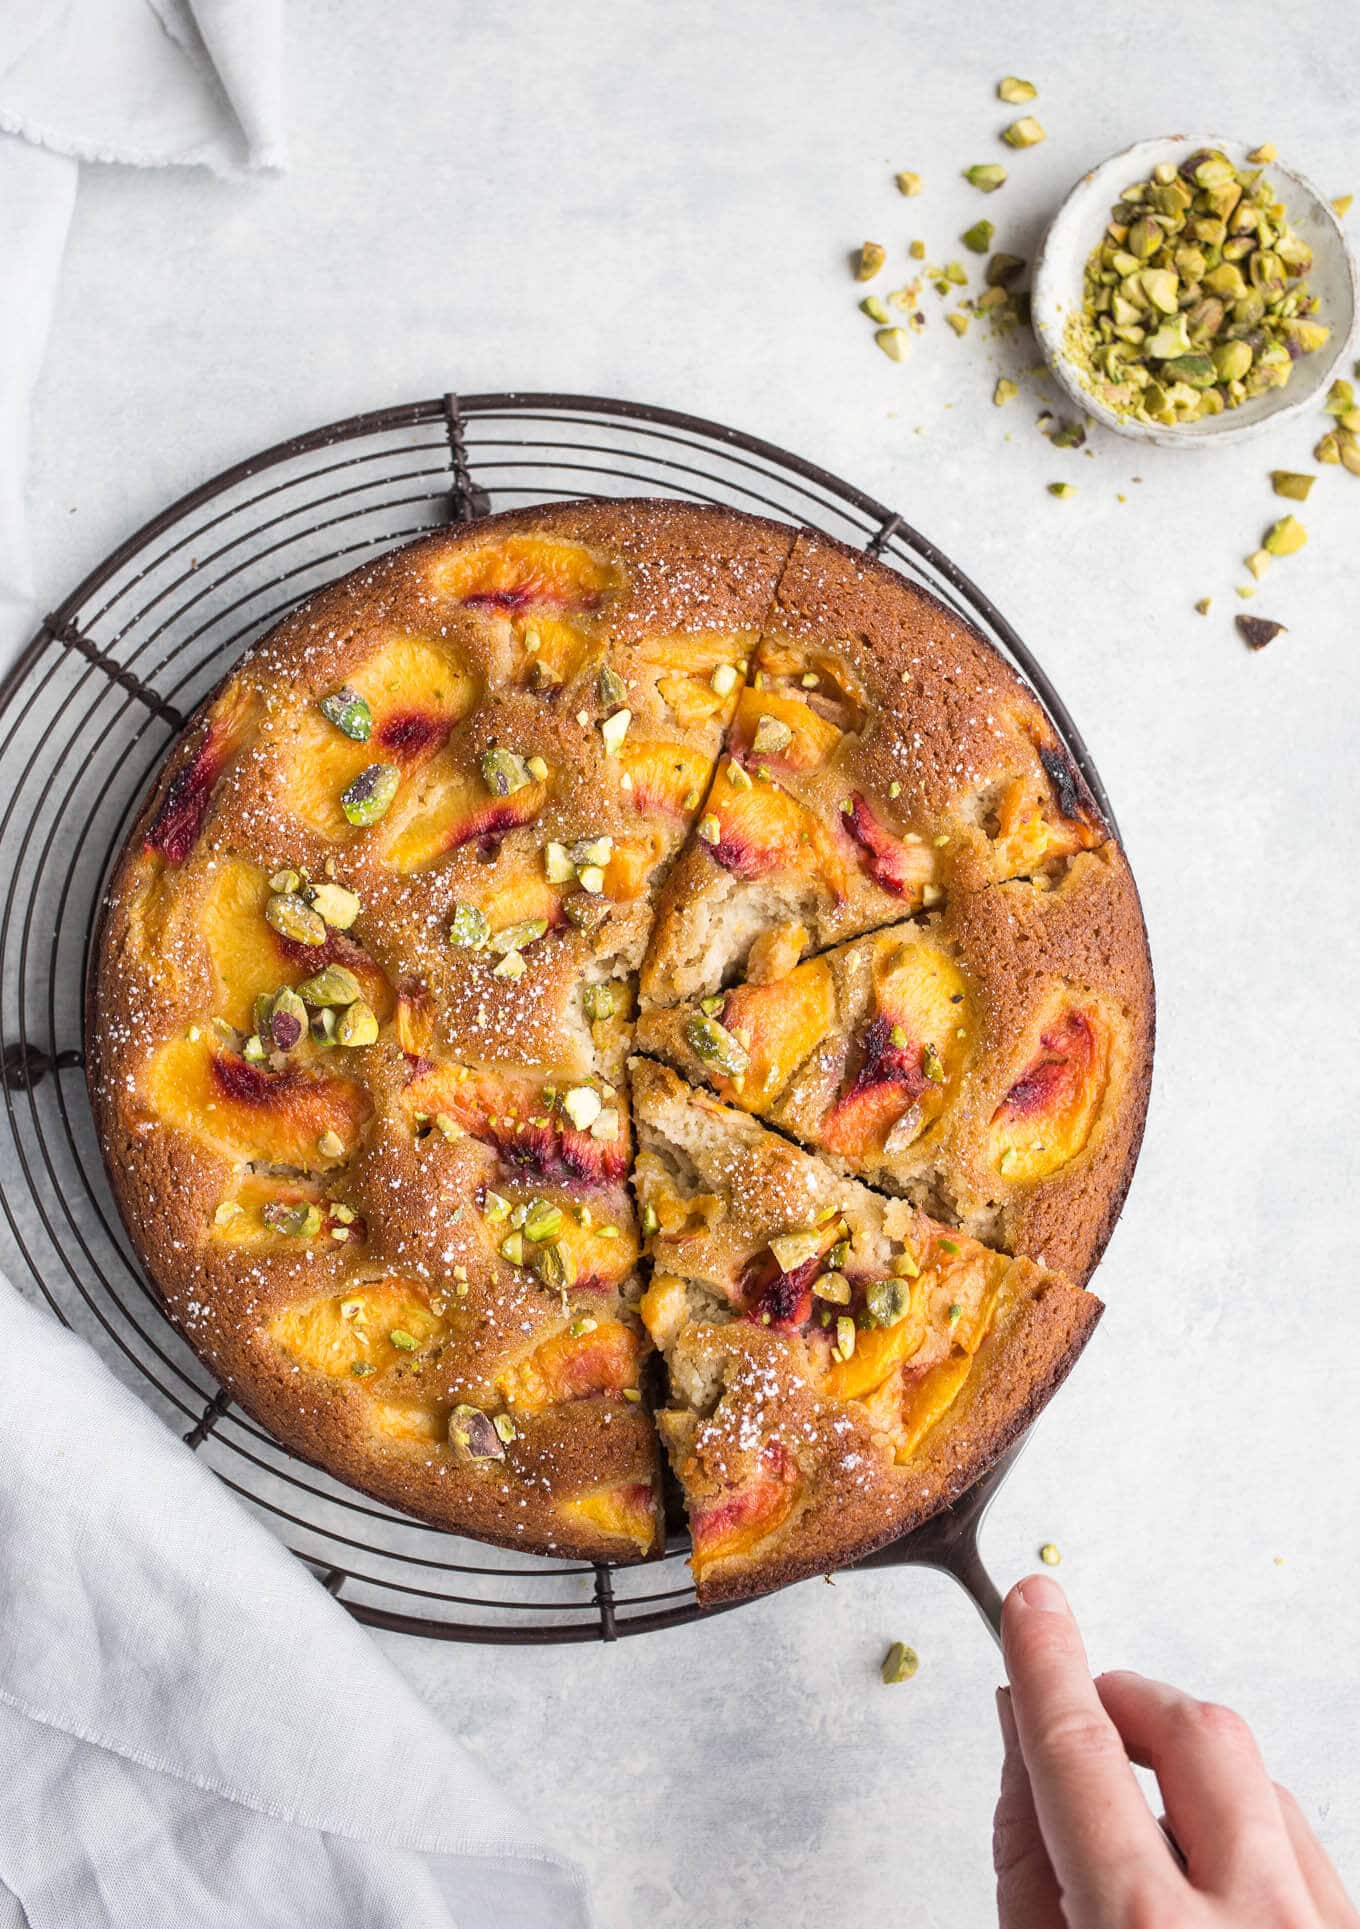 This deliciously moist Olive Oil Cake with Peaches made with almond flour and corn flour is a wholesome treat. Gluten-free, dairy-free, refined sugar-free.